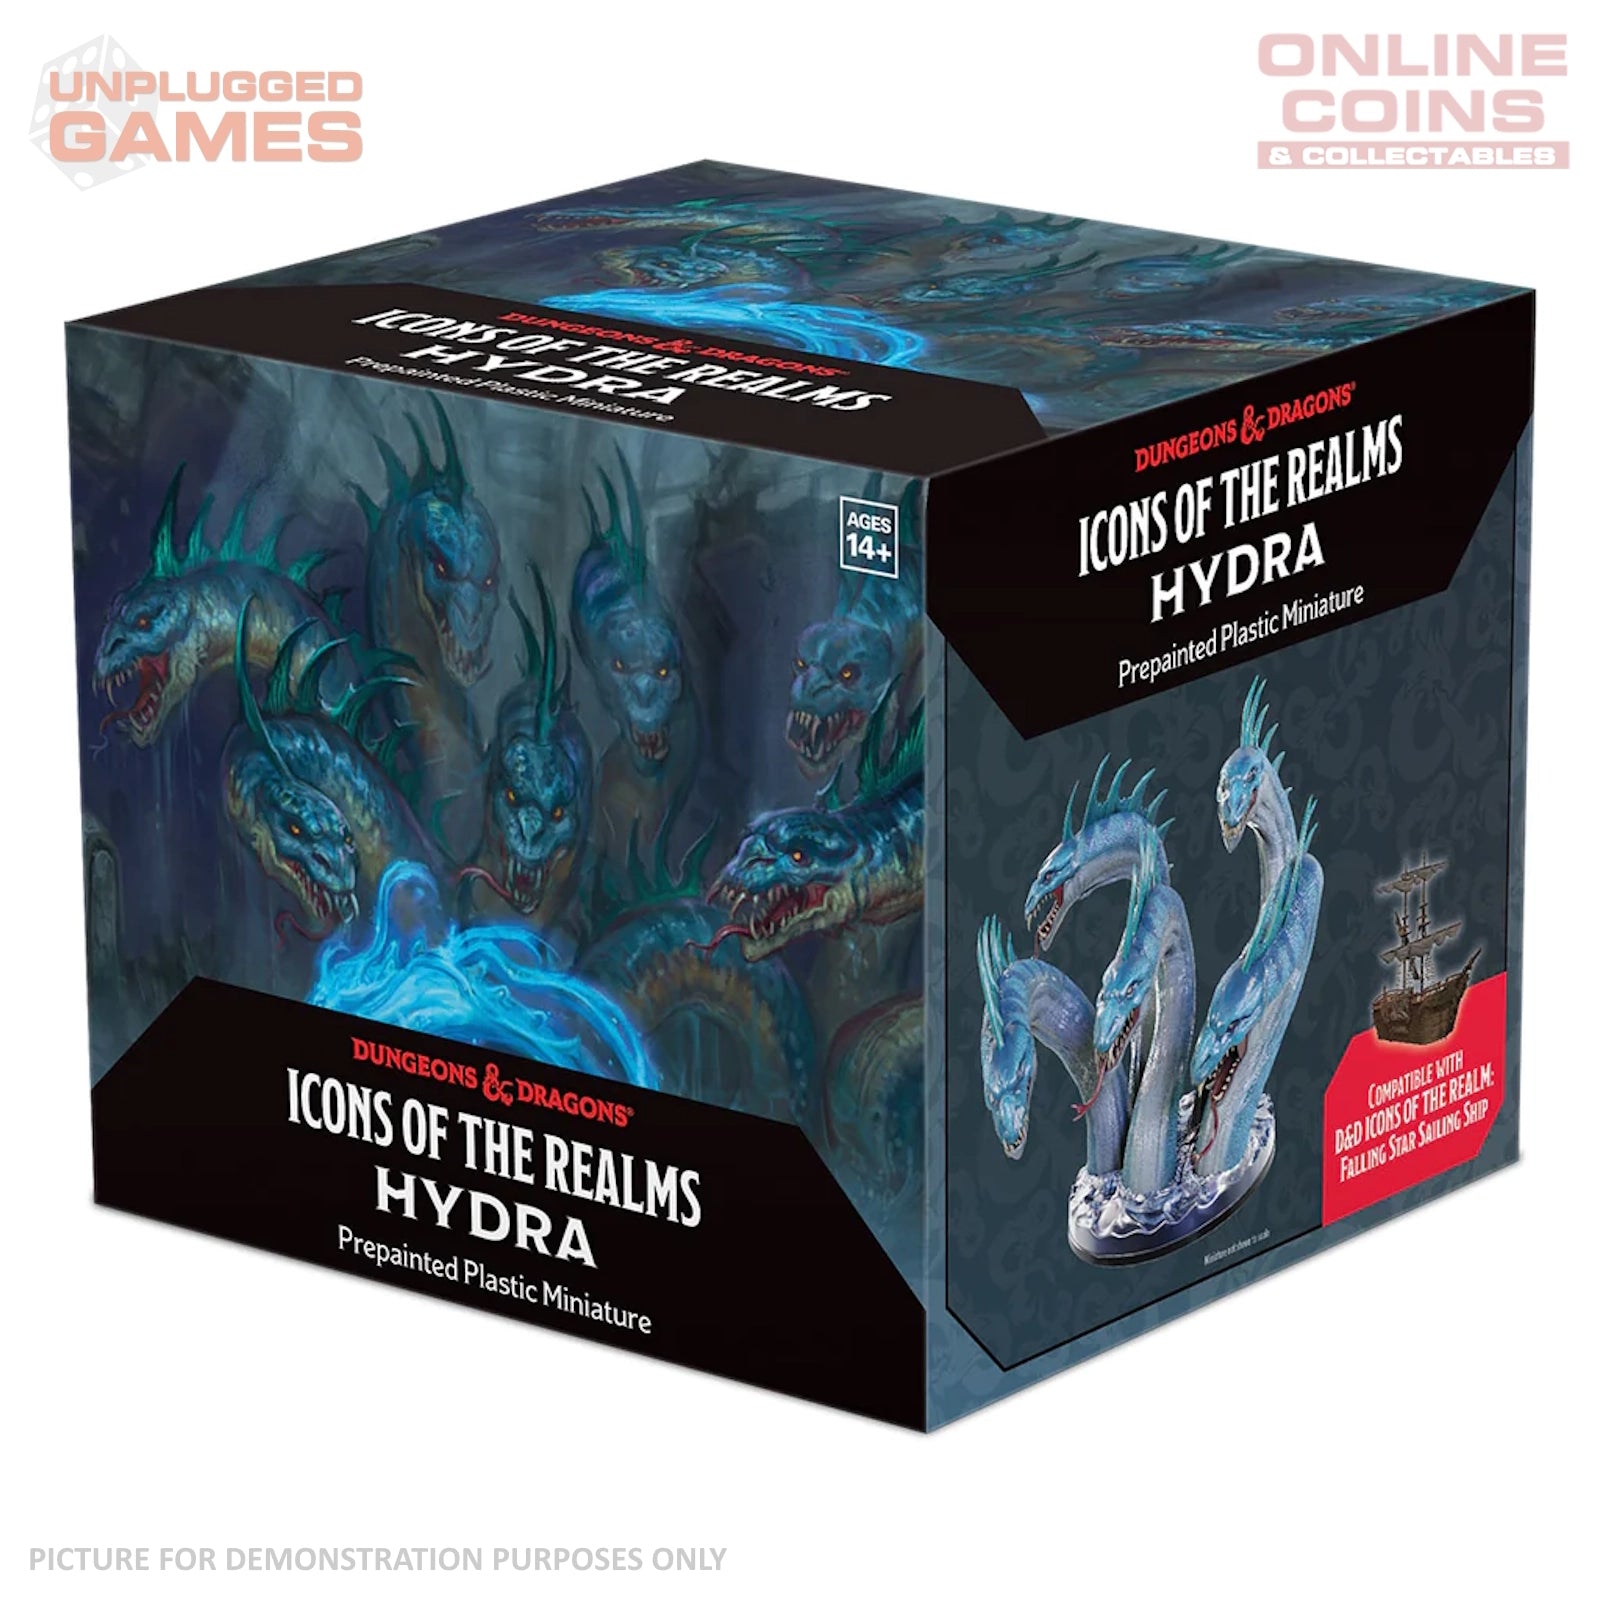 Dungeons & Dragons Icons of the Realms - Hydra